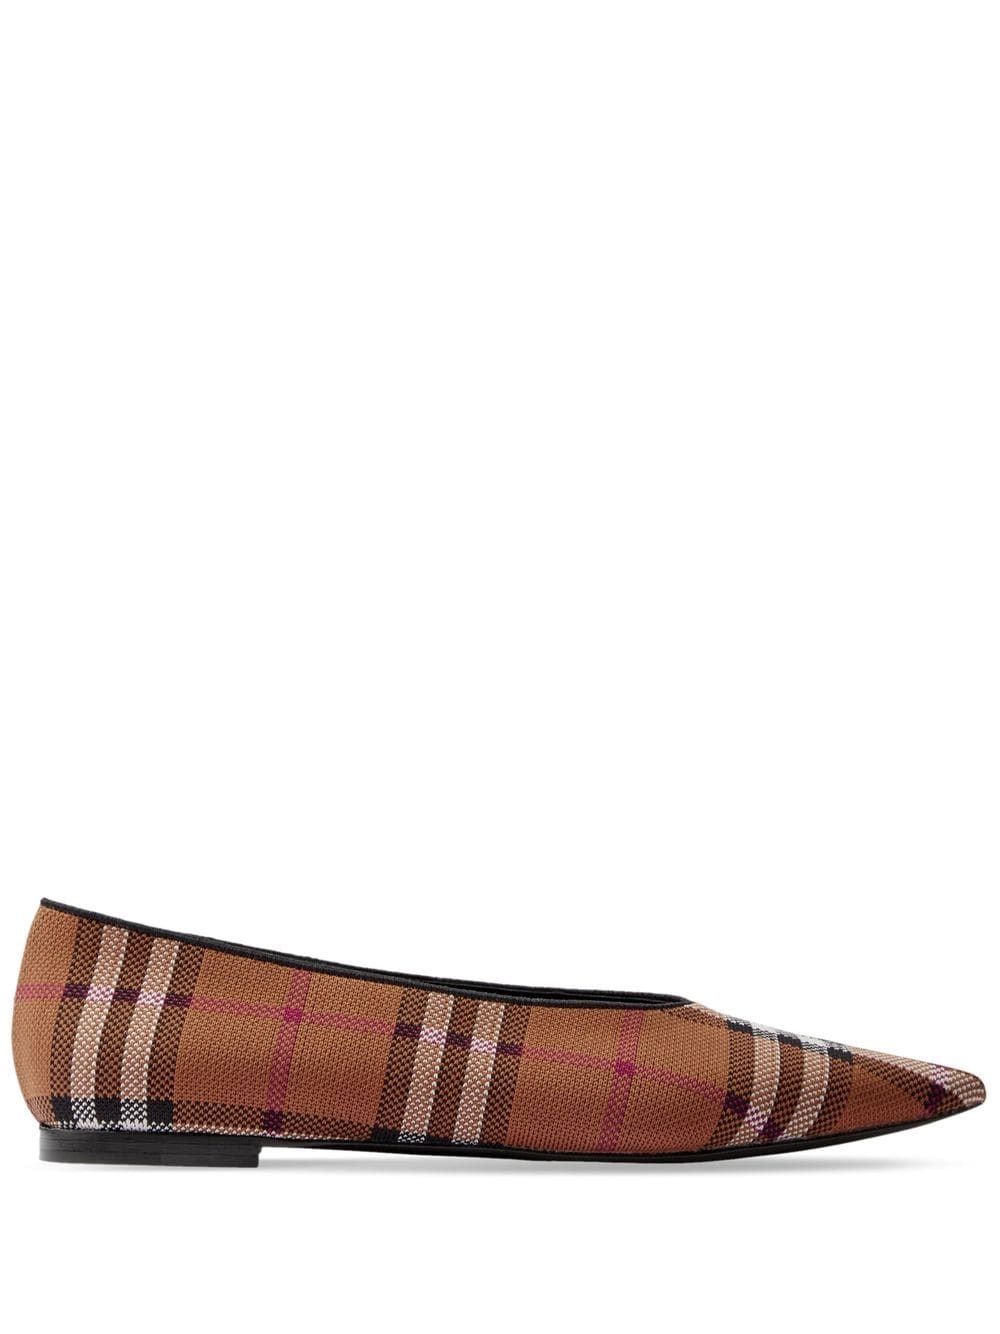 BURBERRY VINTAGE-CHECK POINTED-TOE BALLERINA SHOES